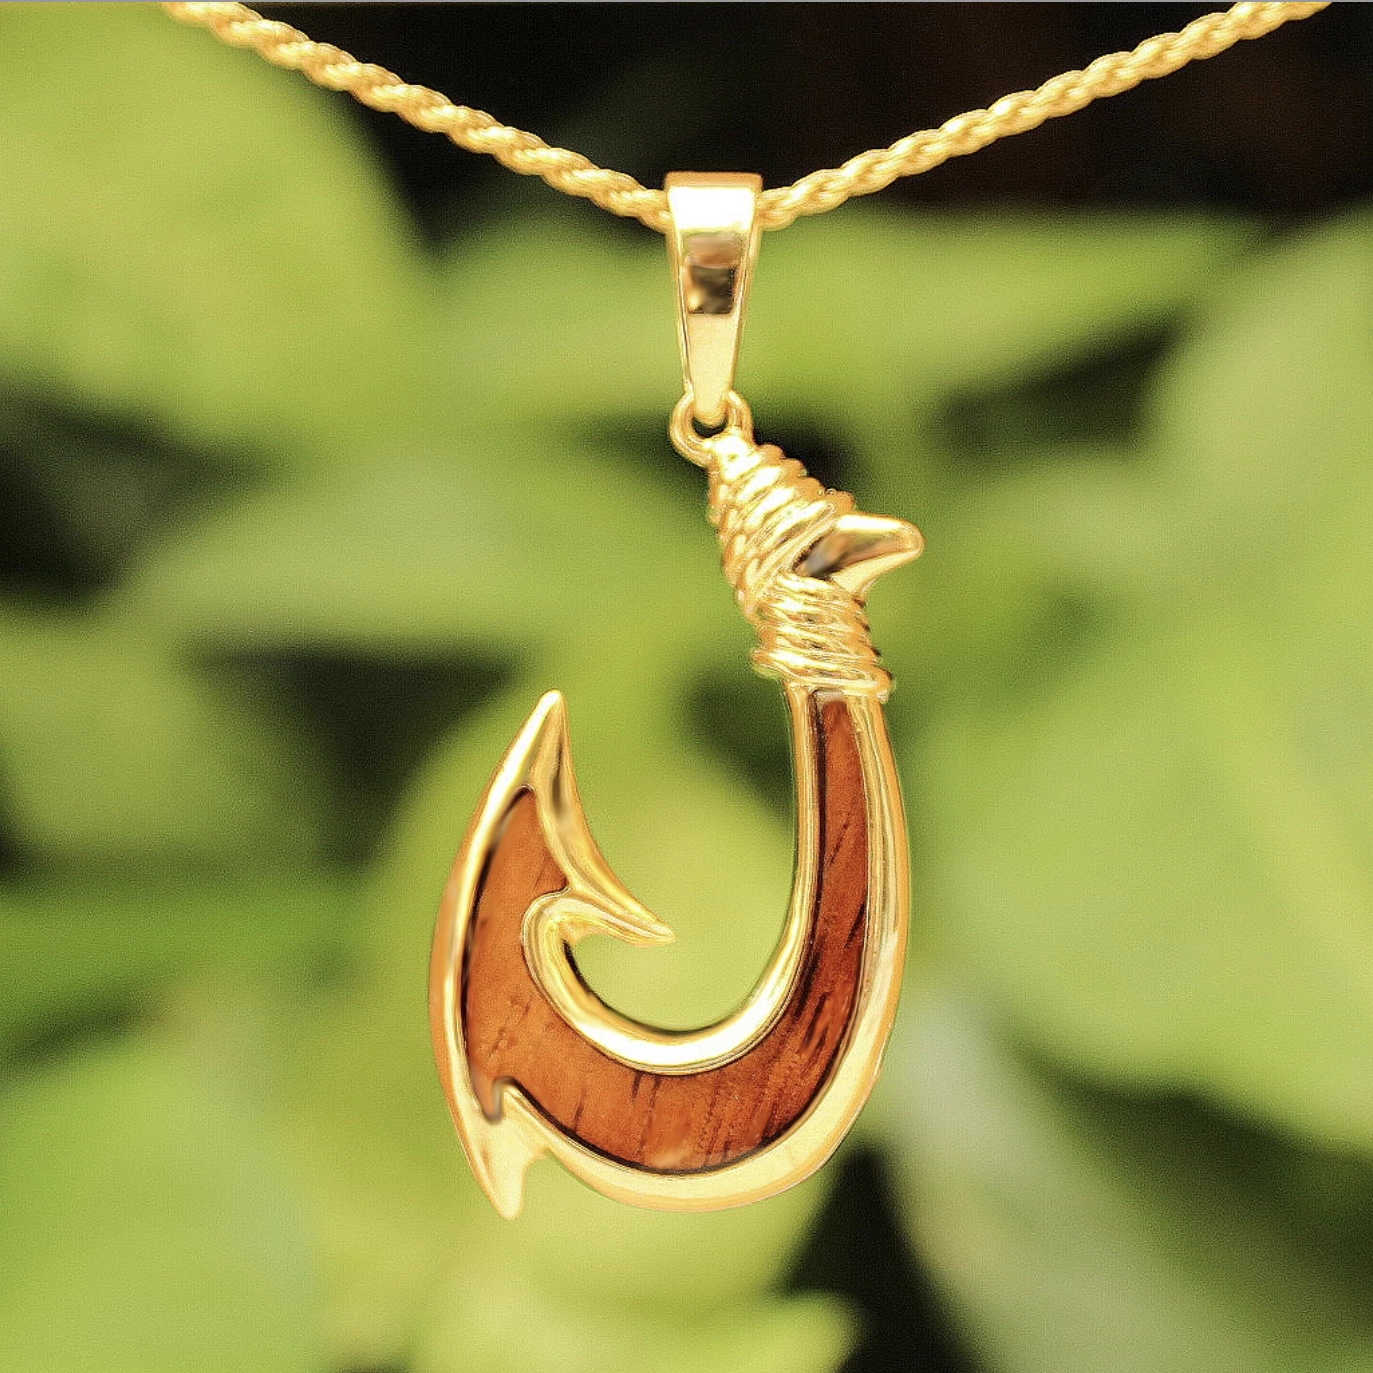 14K Gold Plated over Brass Fish hook Pendant and Chain Closeup